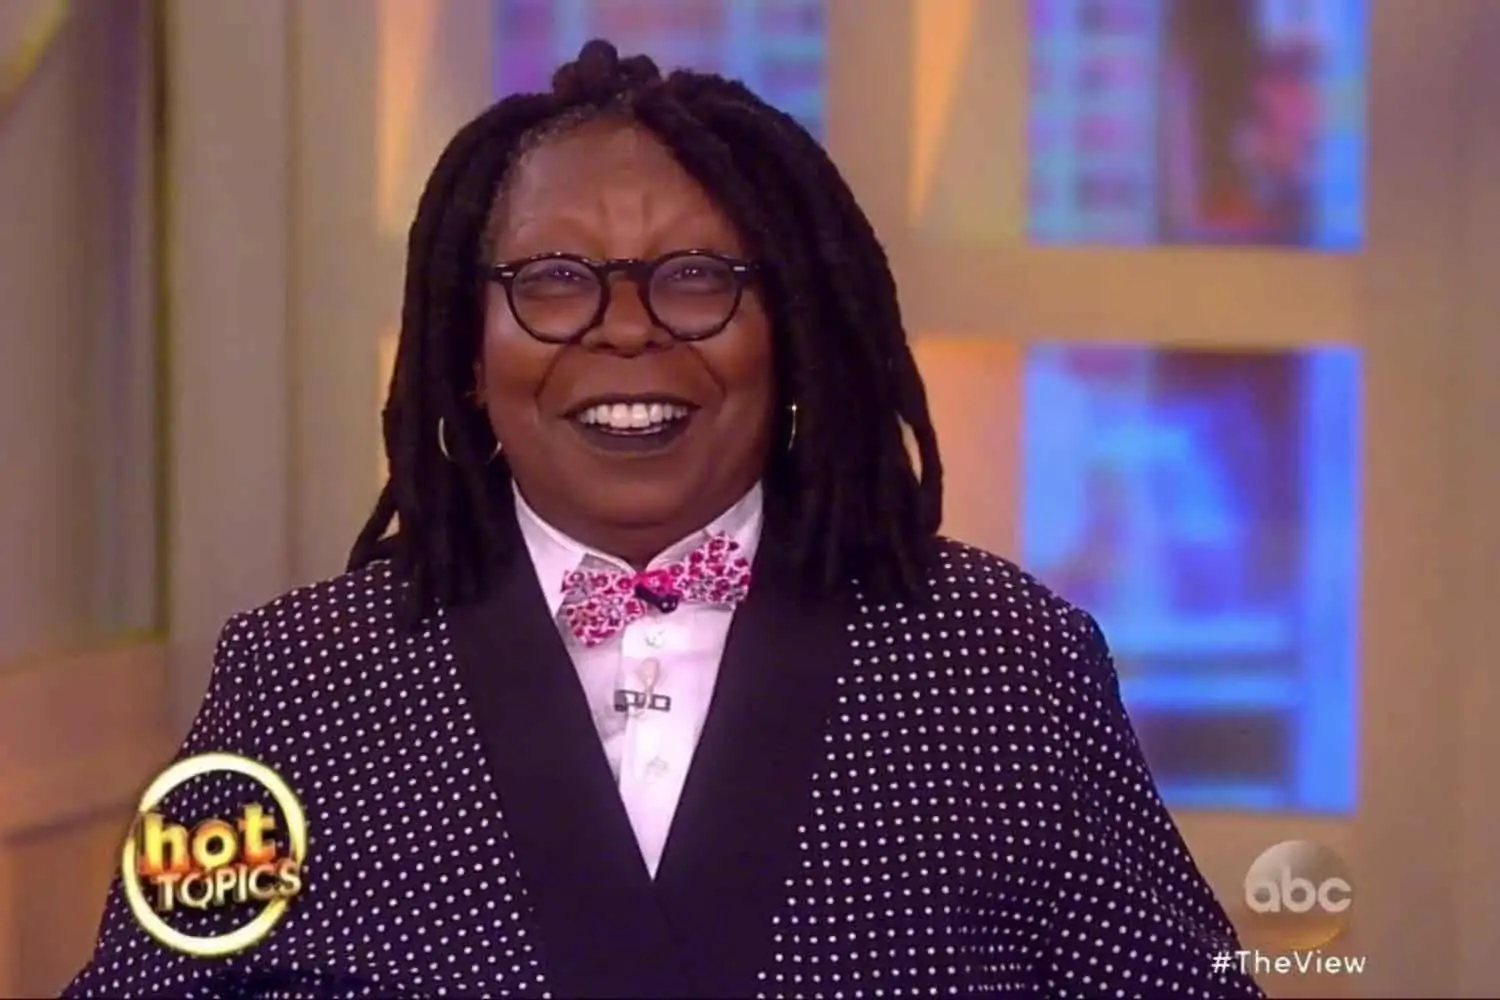 Whoopi Goldberg suspended from "The View" after Holocaust comments